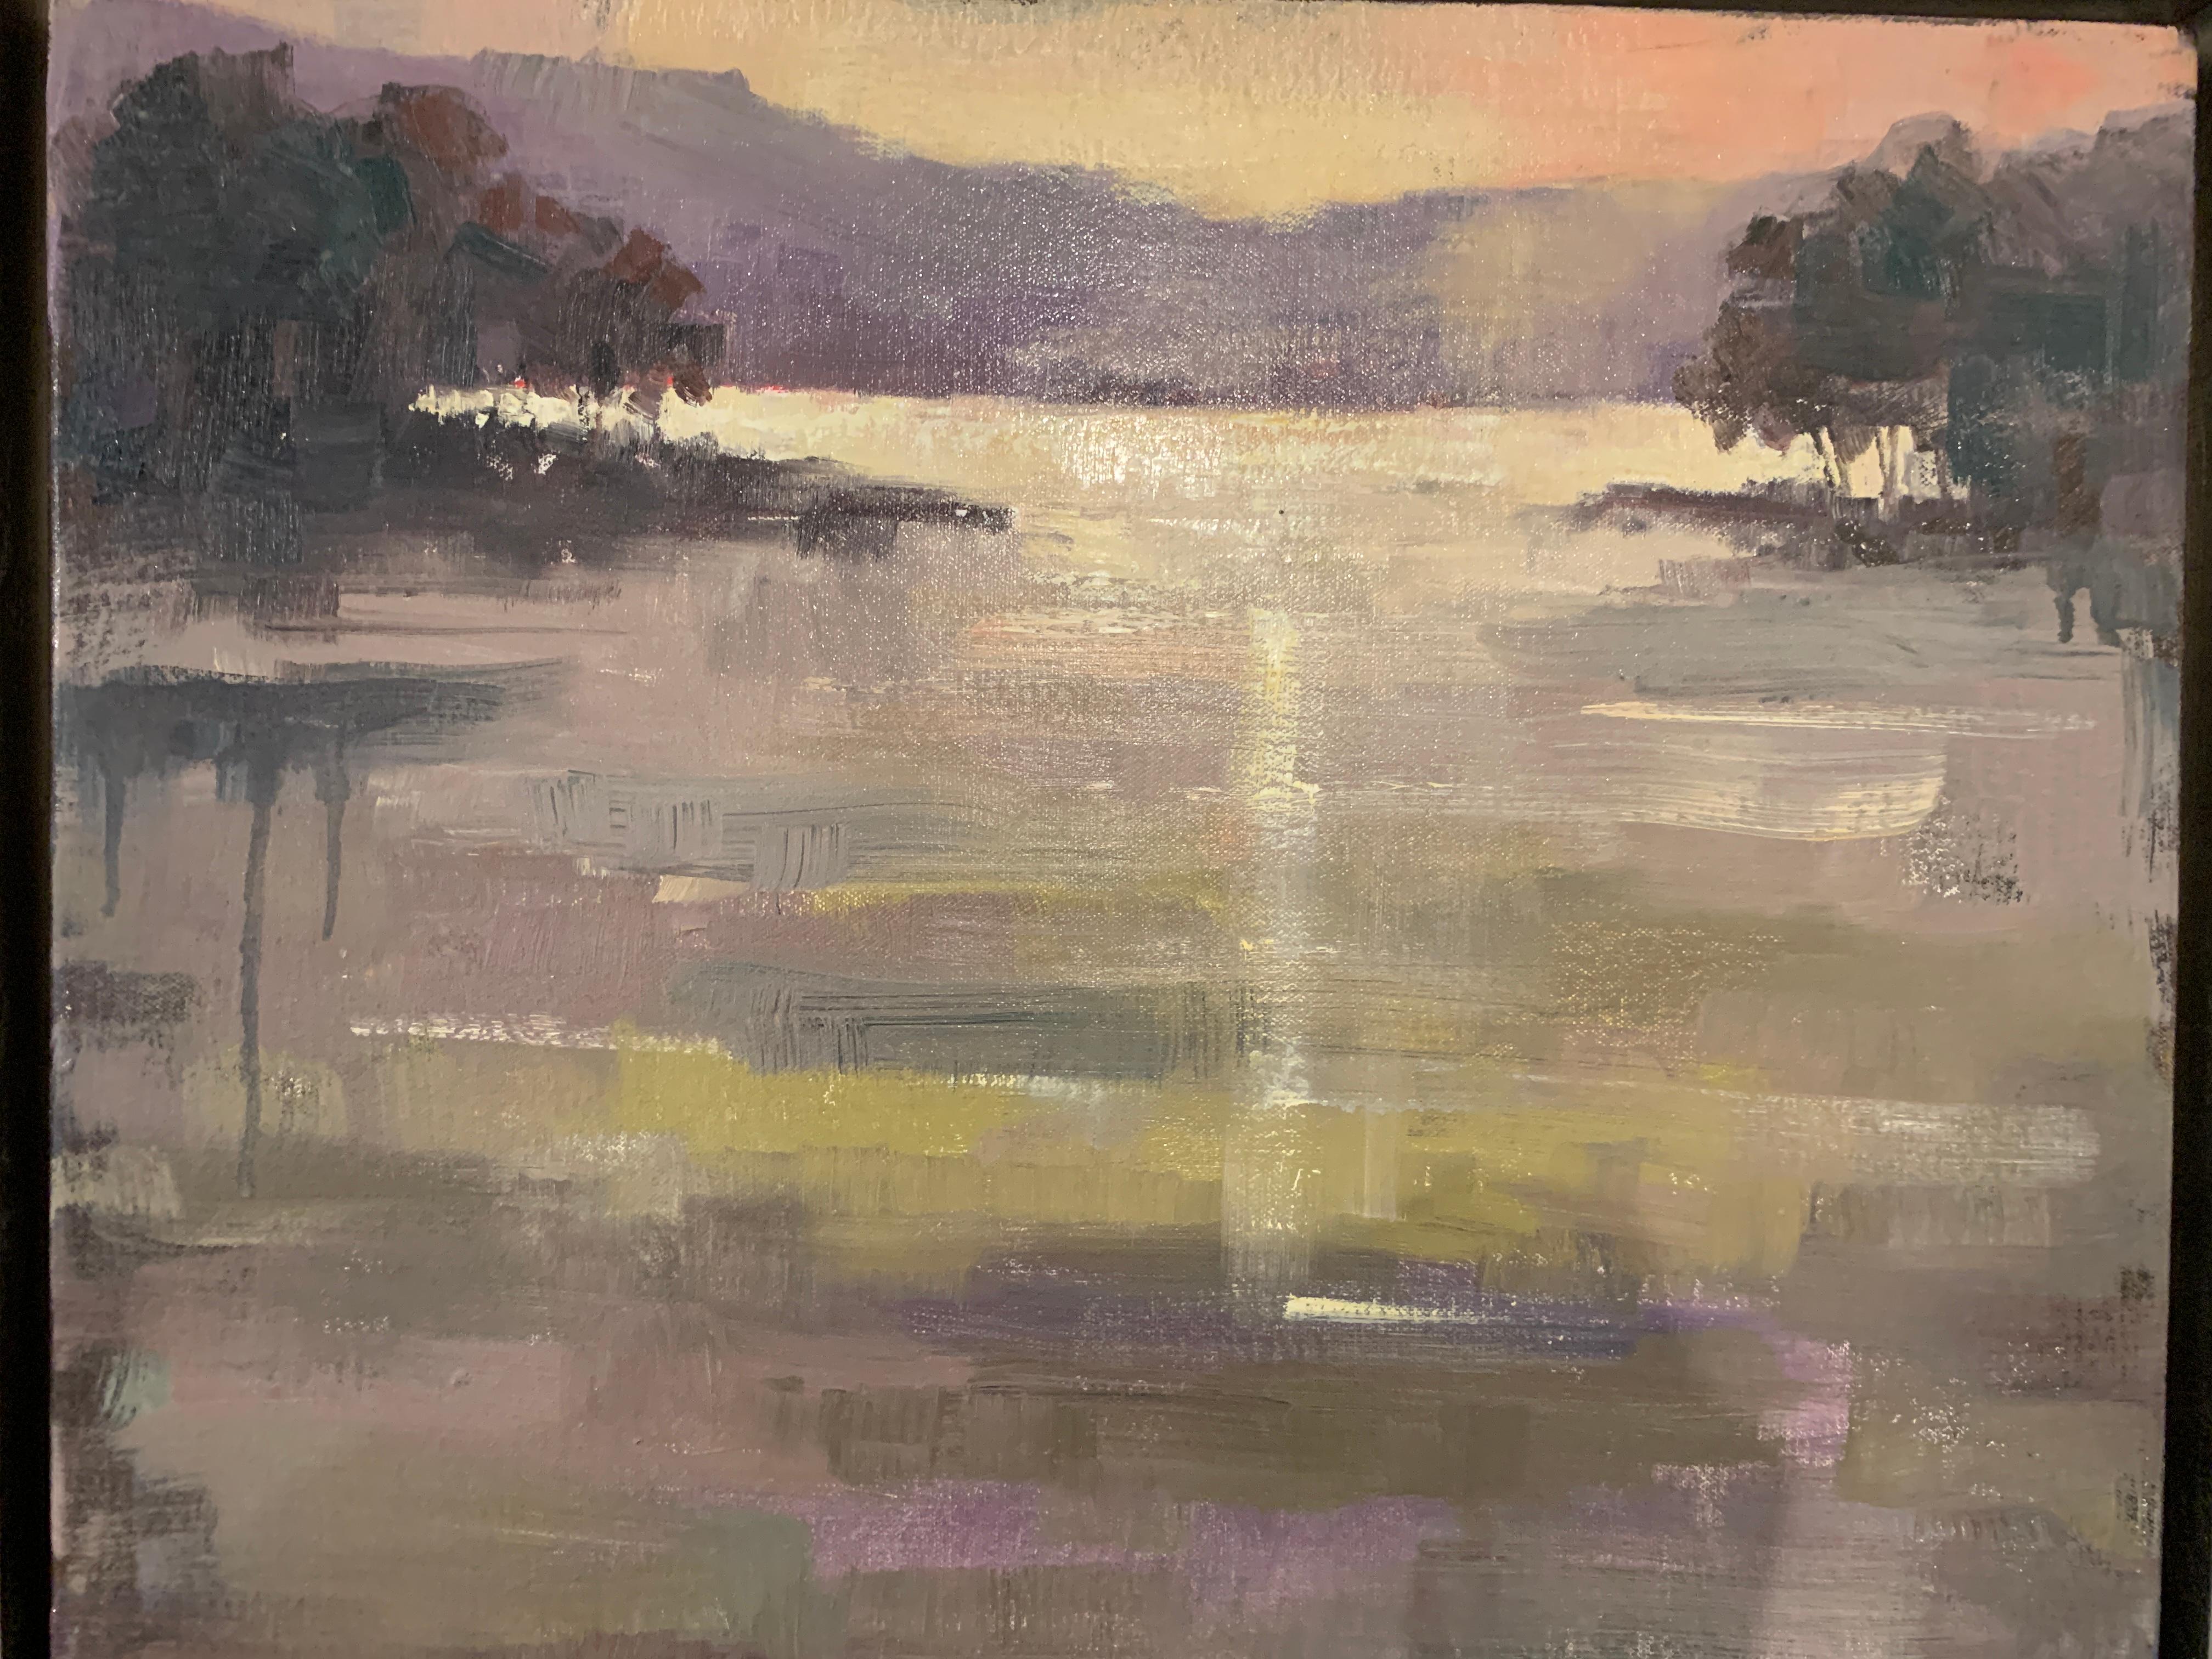 'Twilight' is a framed Impressionist oil on canvas landscape painting created by American artist Allison Chambers in 2020. Featuring an exquisite palette made of ocher, blue, green and pink tones, the painting exudes an aura of serenity. A central